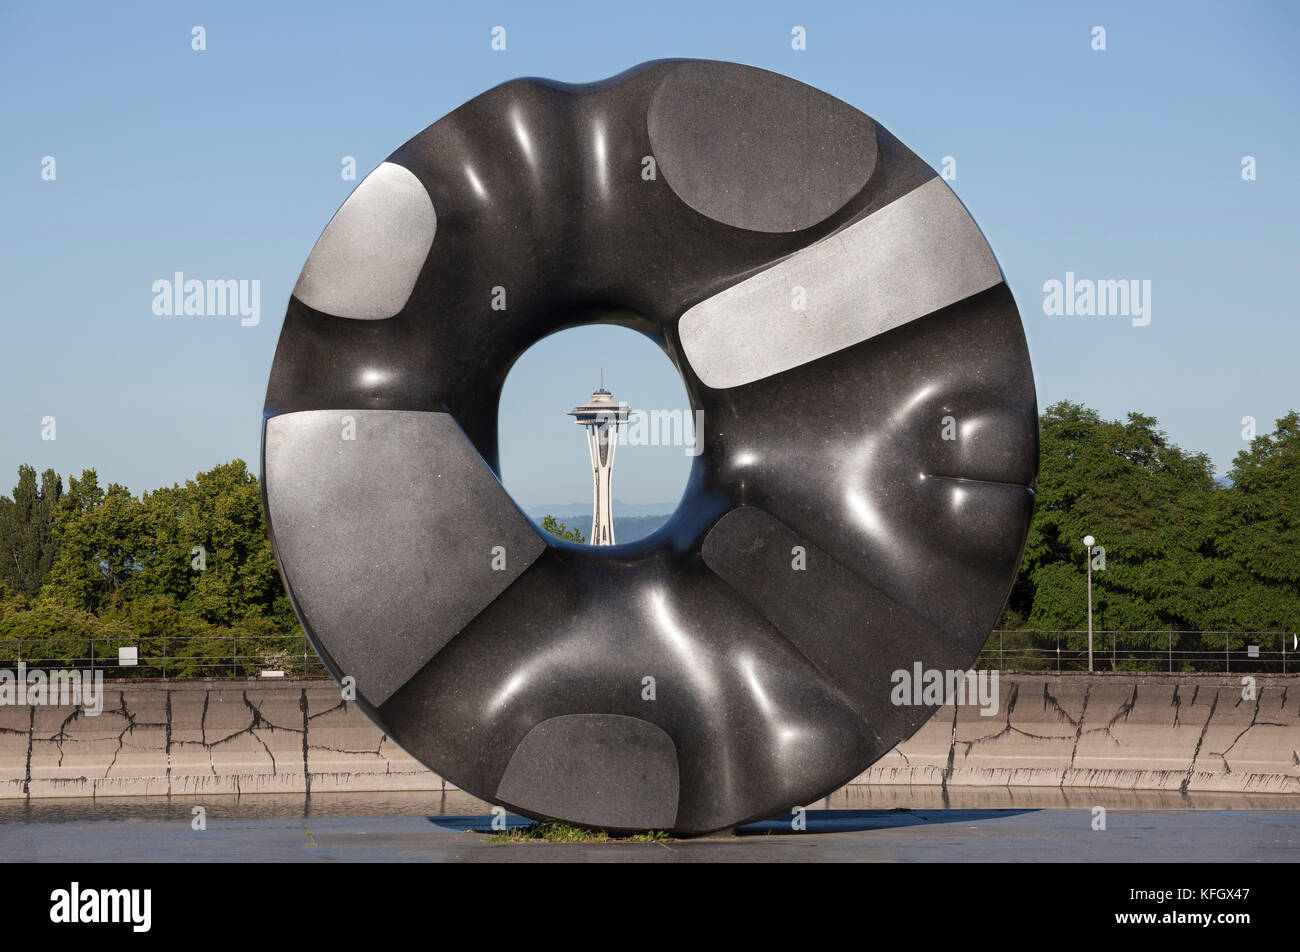 WA14063-00...WASHINGTON - Sculpture Black Hole Sun by Noguchi in Seattles Volunteer Park frames the Space Needle in the distance' Stock Photo